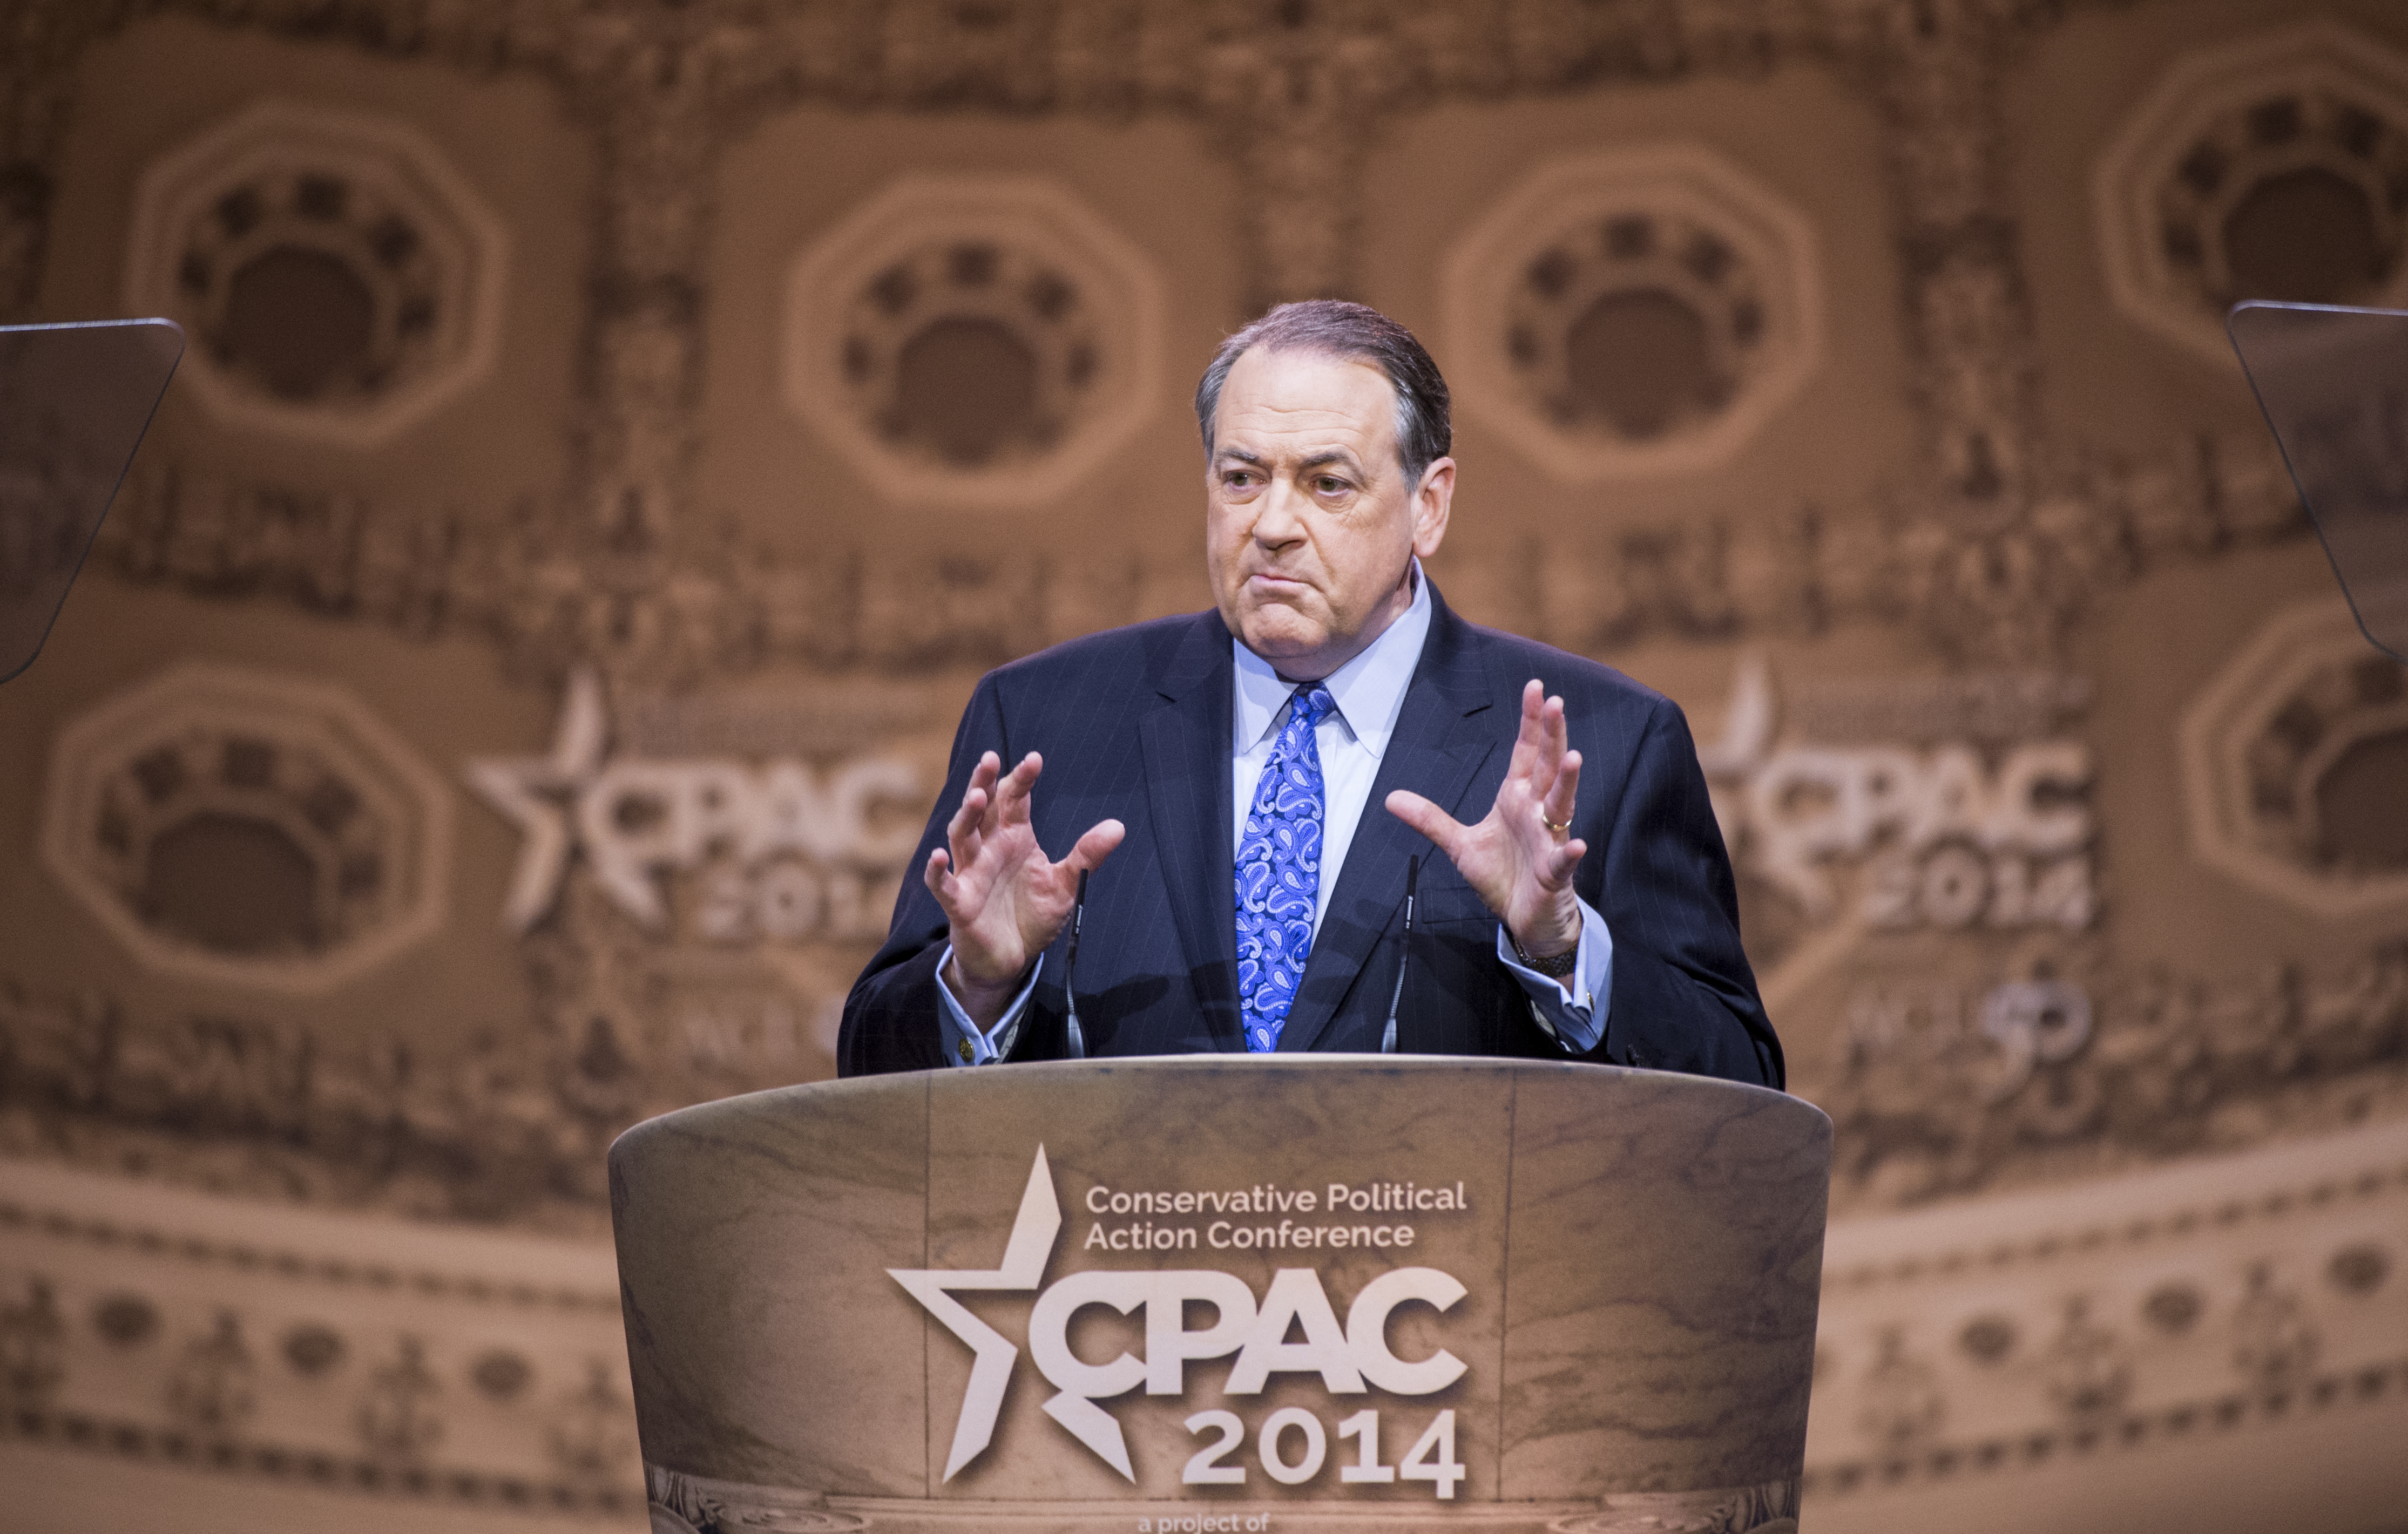 Former Arkansas Gov. Mike Huckabee speaks during the American Conservative Union's Conservative Political Action Conference (CPAC) at National Harbor, Md. on March 7, 2014. (Bill Clark—CQ-Roll Call)